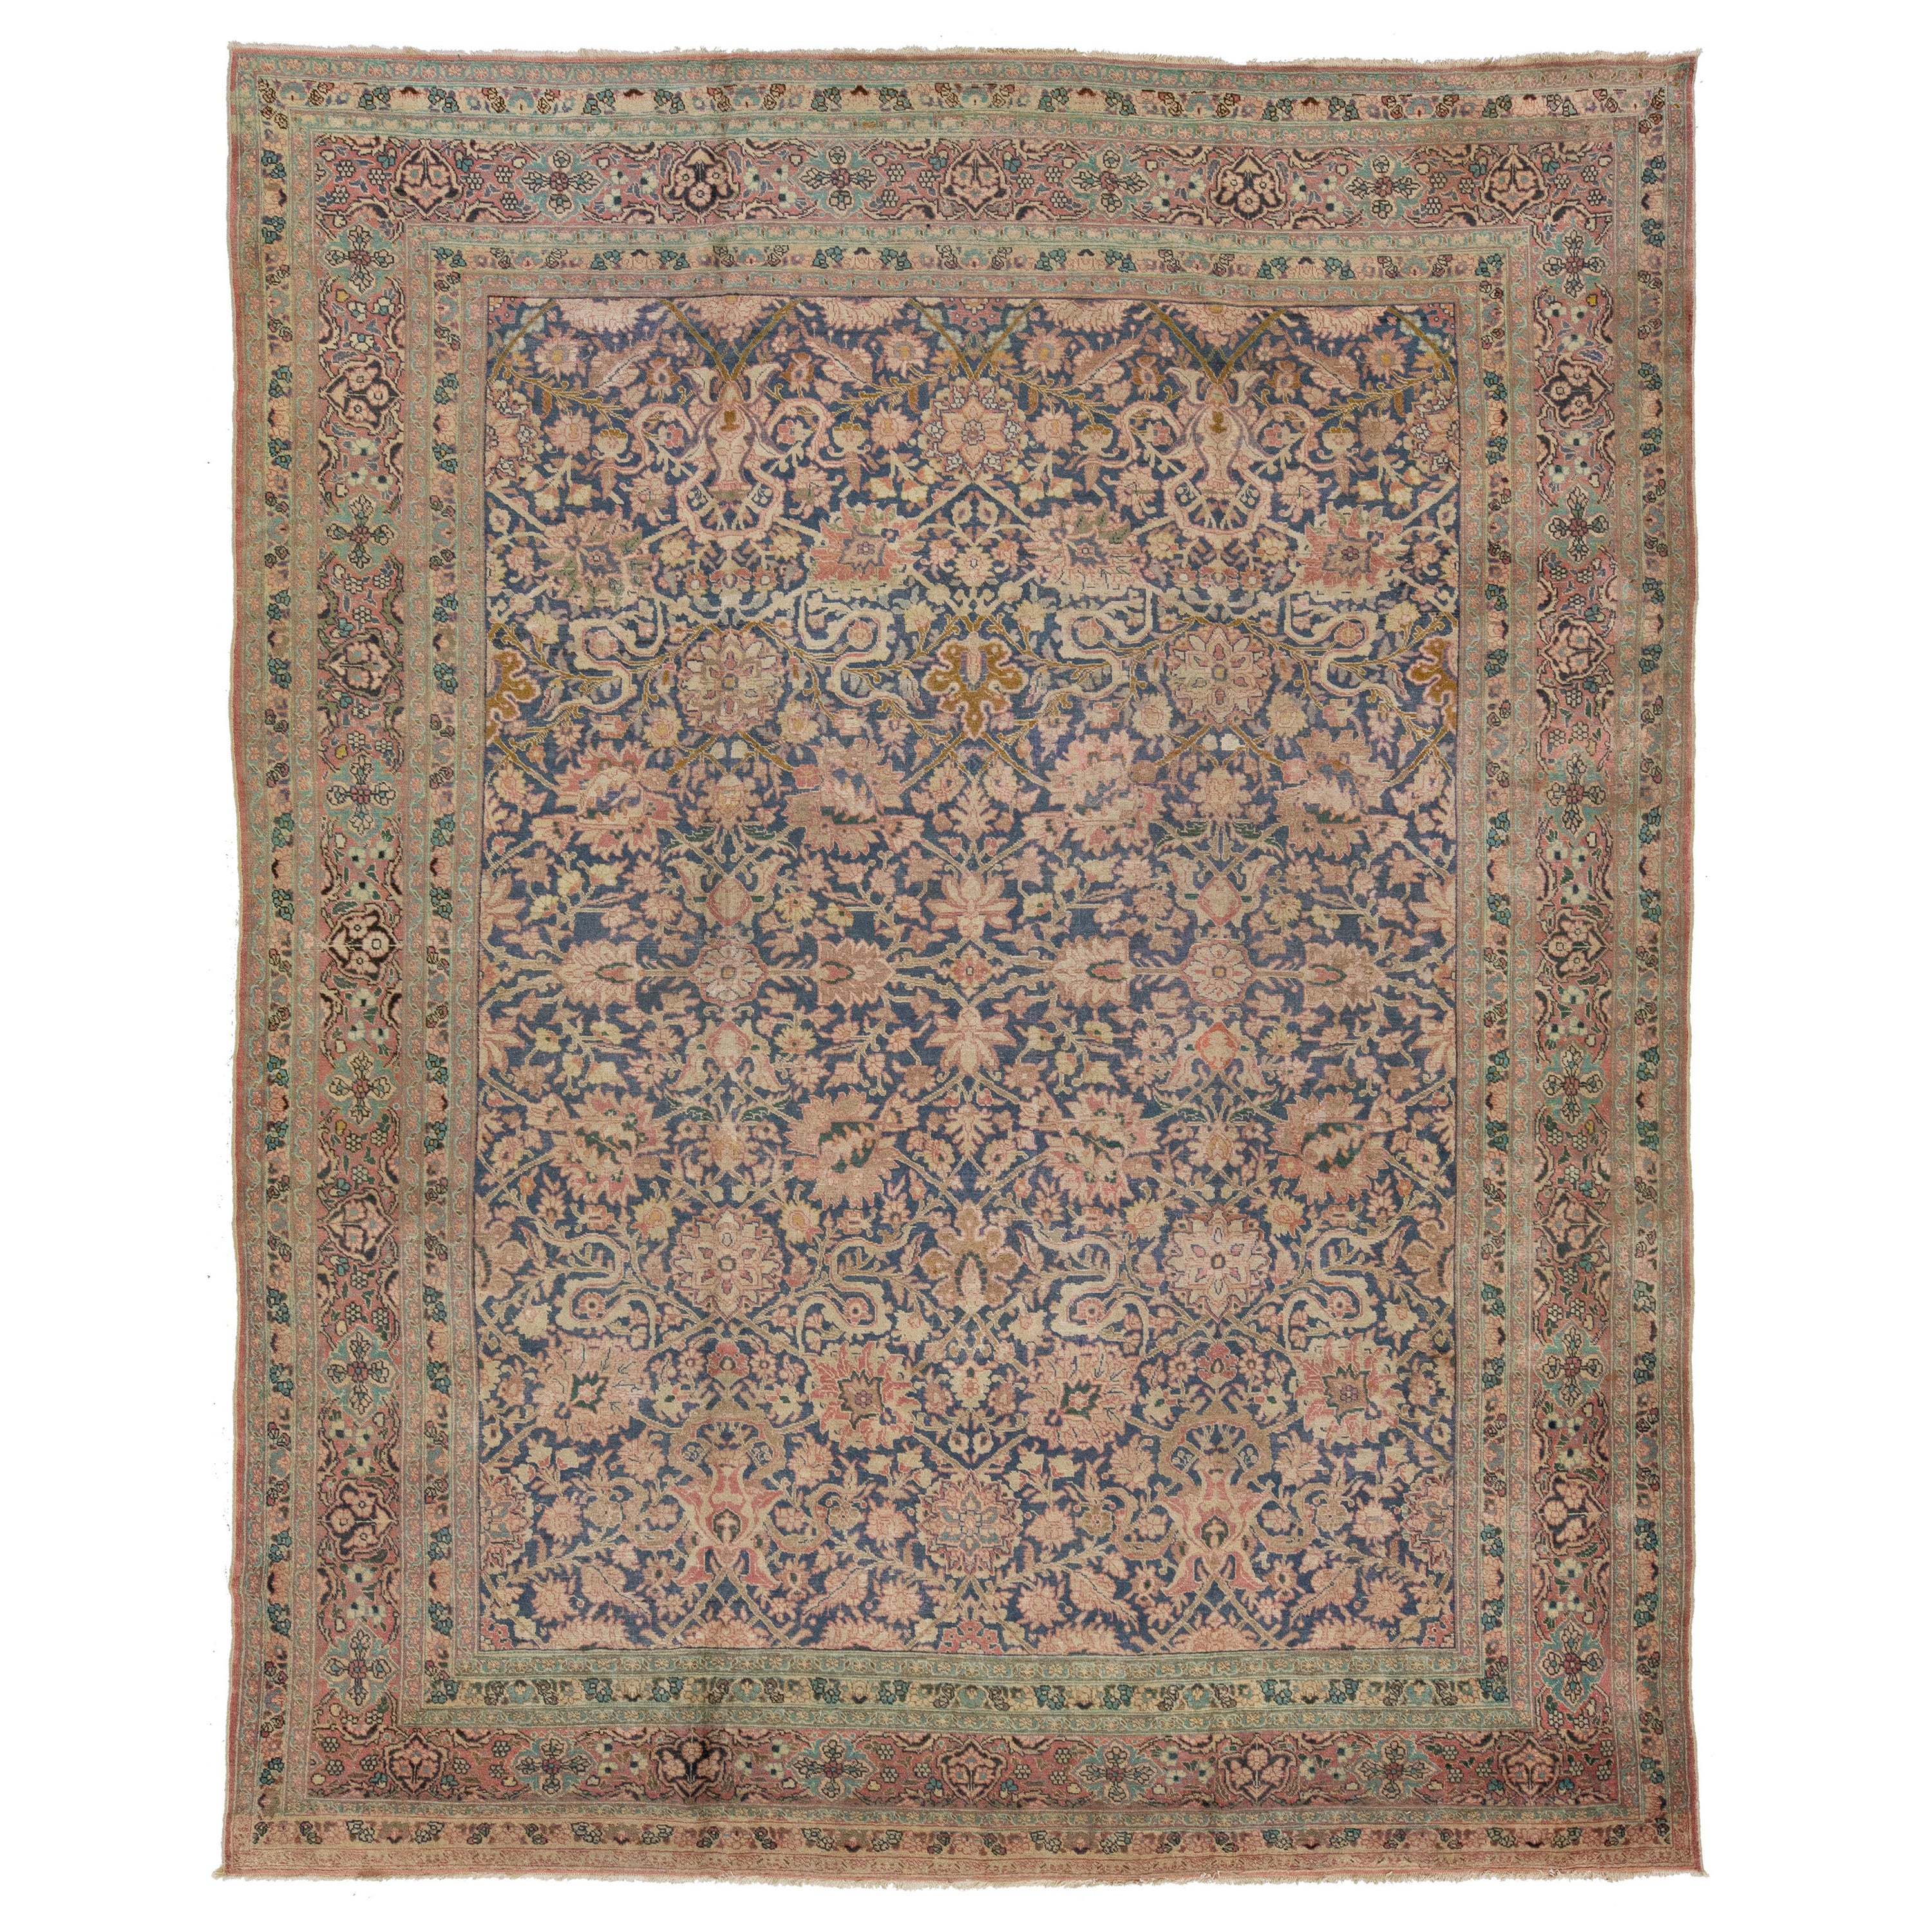 1920s Antique Persian Tabriz Blue Wool Rug With Allover Floral Pattern